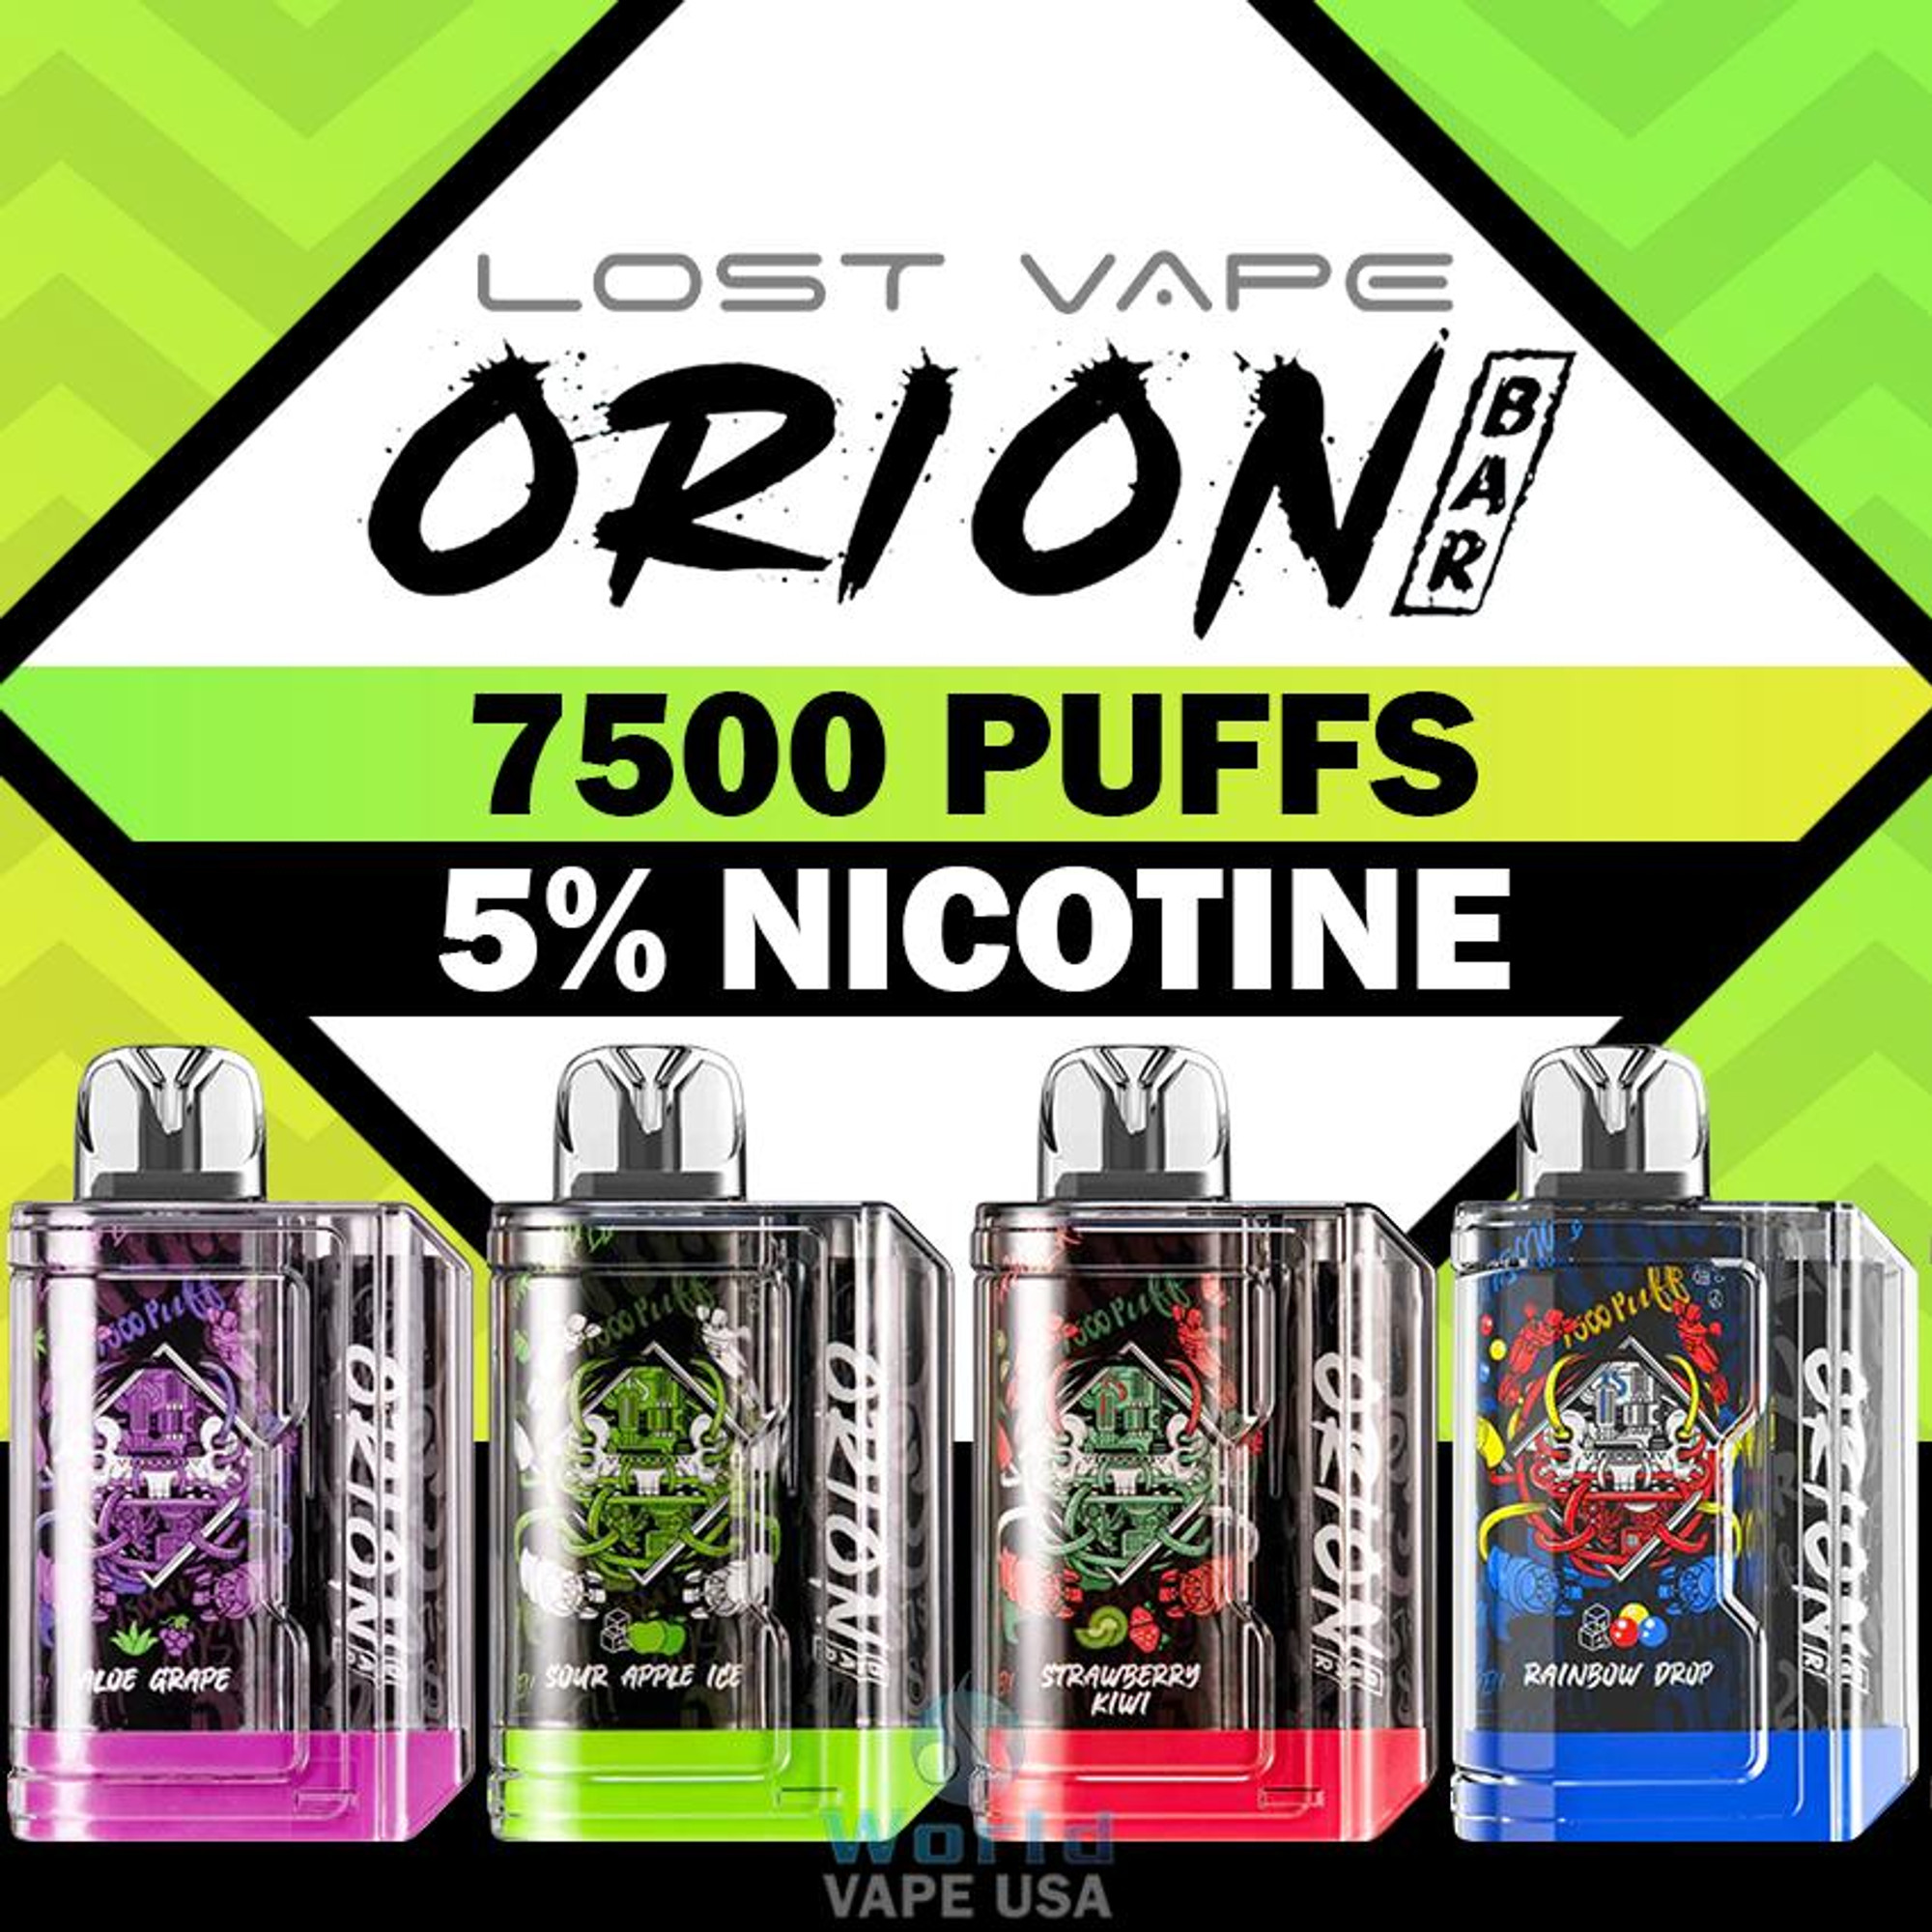 https://cdn11.bigcommerce.com/s-4hr592w/images/stencil/2000x2000/products/15442/50681/lost-vape-orion-bar-5percent-nic-rechargeable-disposable-7500-puffs-18ml-10ct-display__42268.1686733537.jpg?c=2